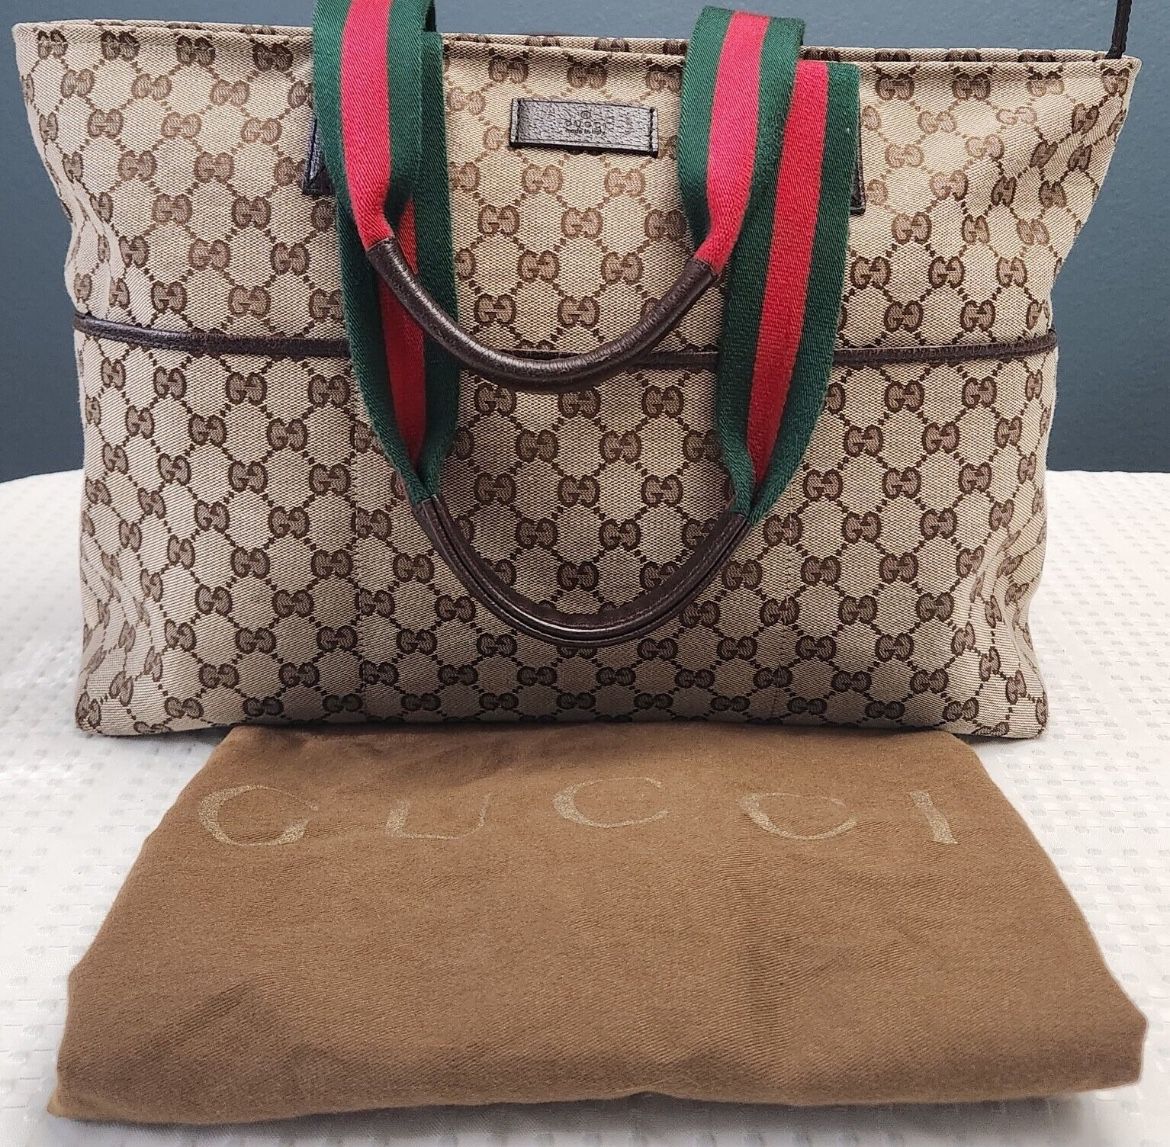 2006 Sherry Line Gucci  Saddle Bag/Tote/Diaper bag With button